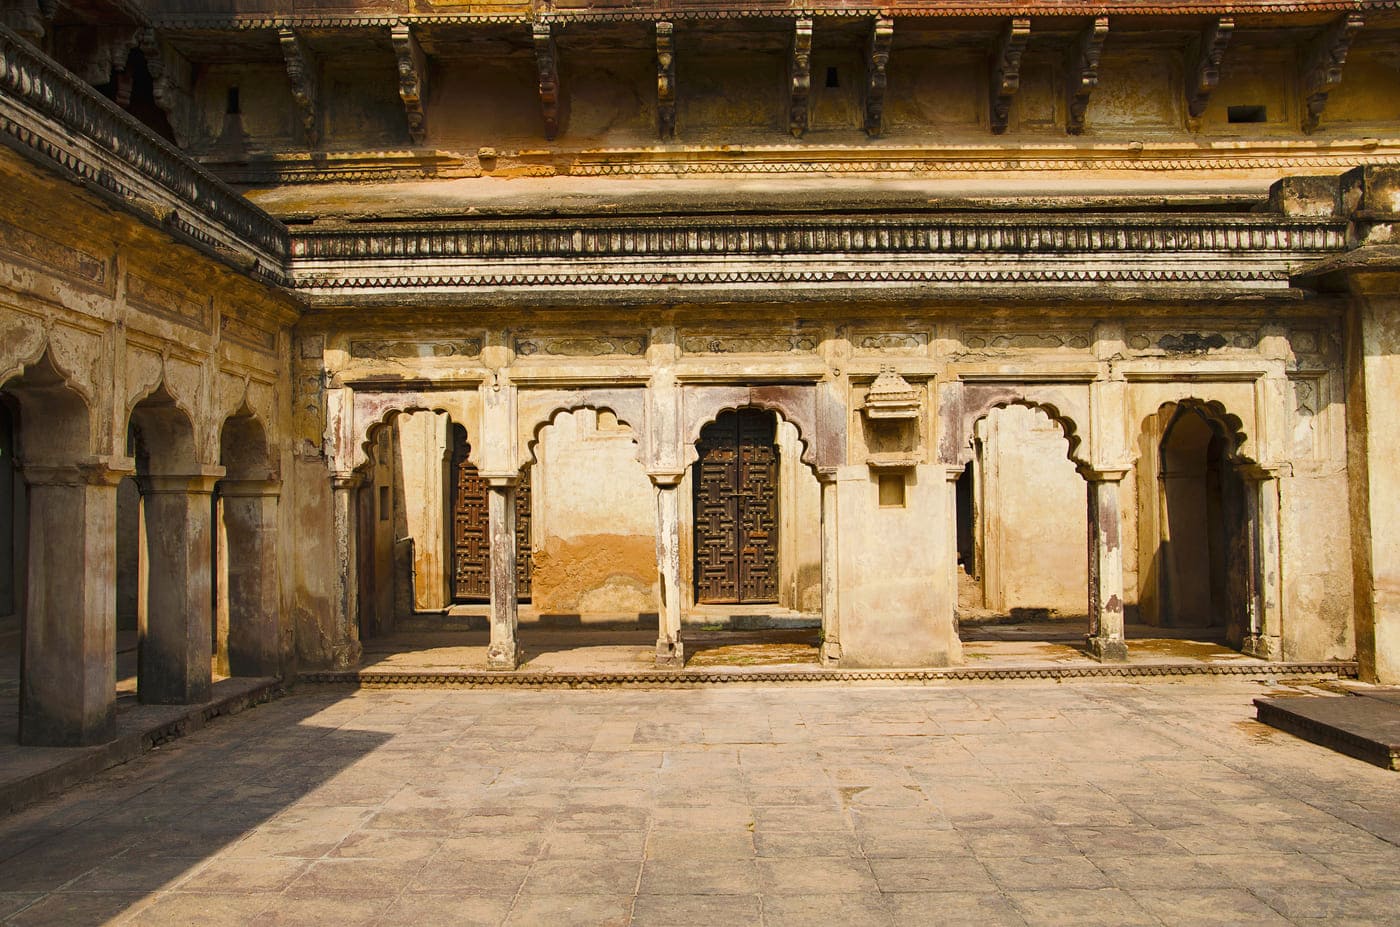 One of the many open-air courtyards within the Jahangir Palace lit bright by the shining sun during day time, Orchha 